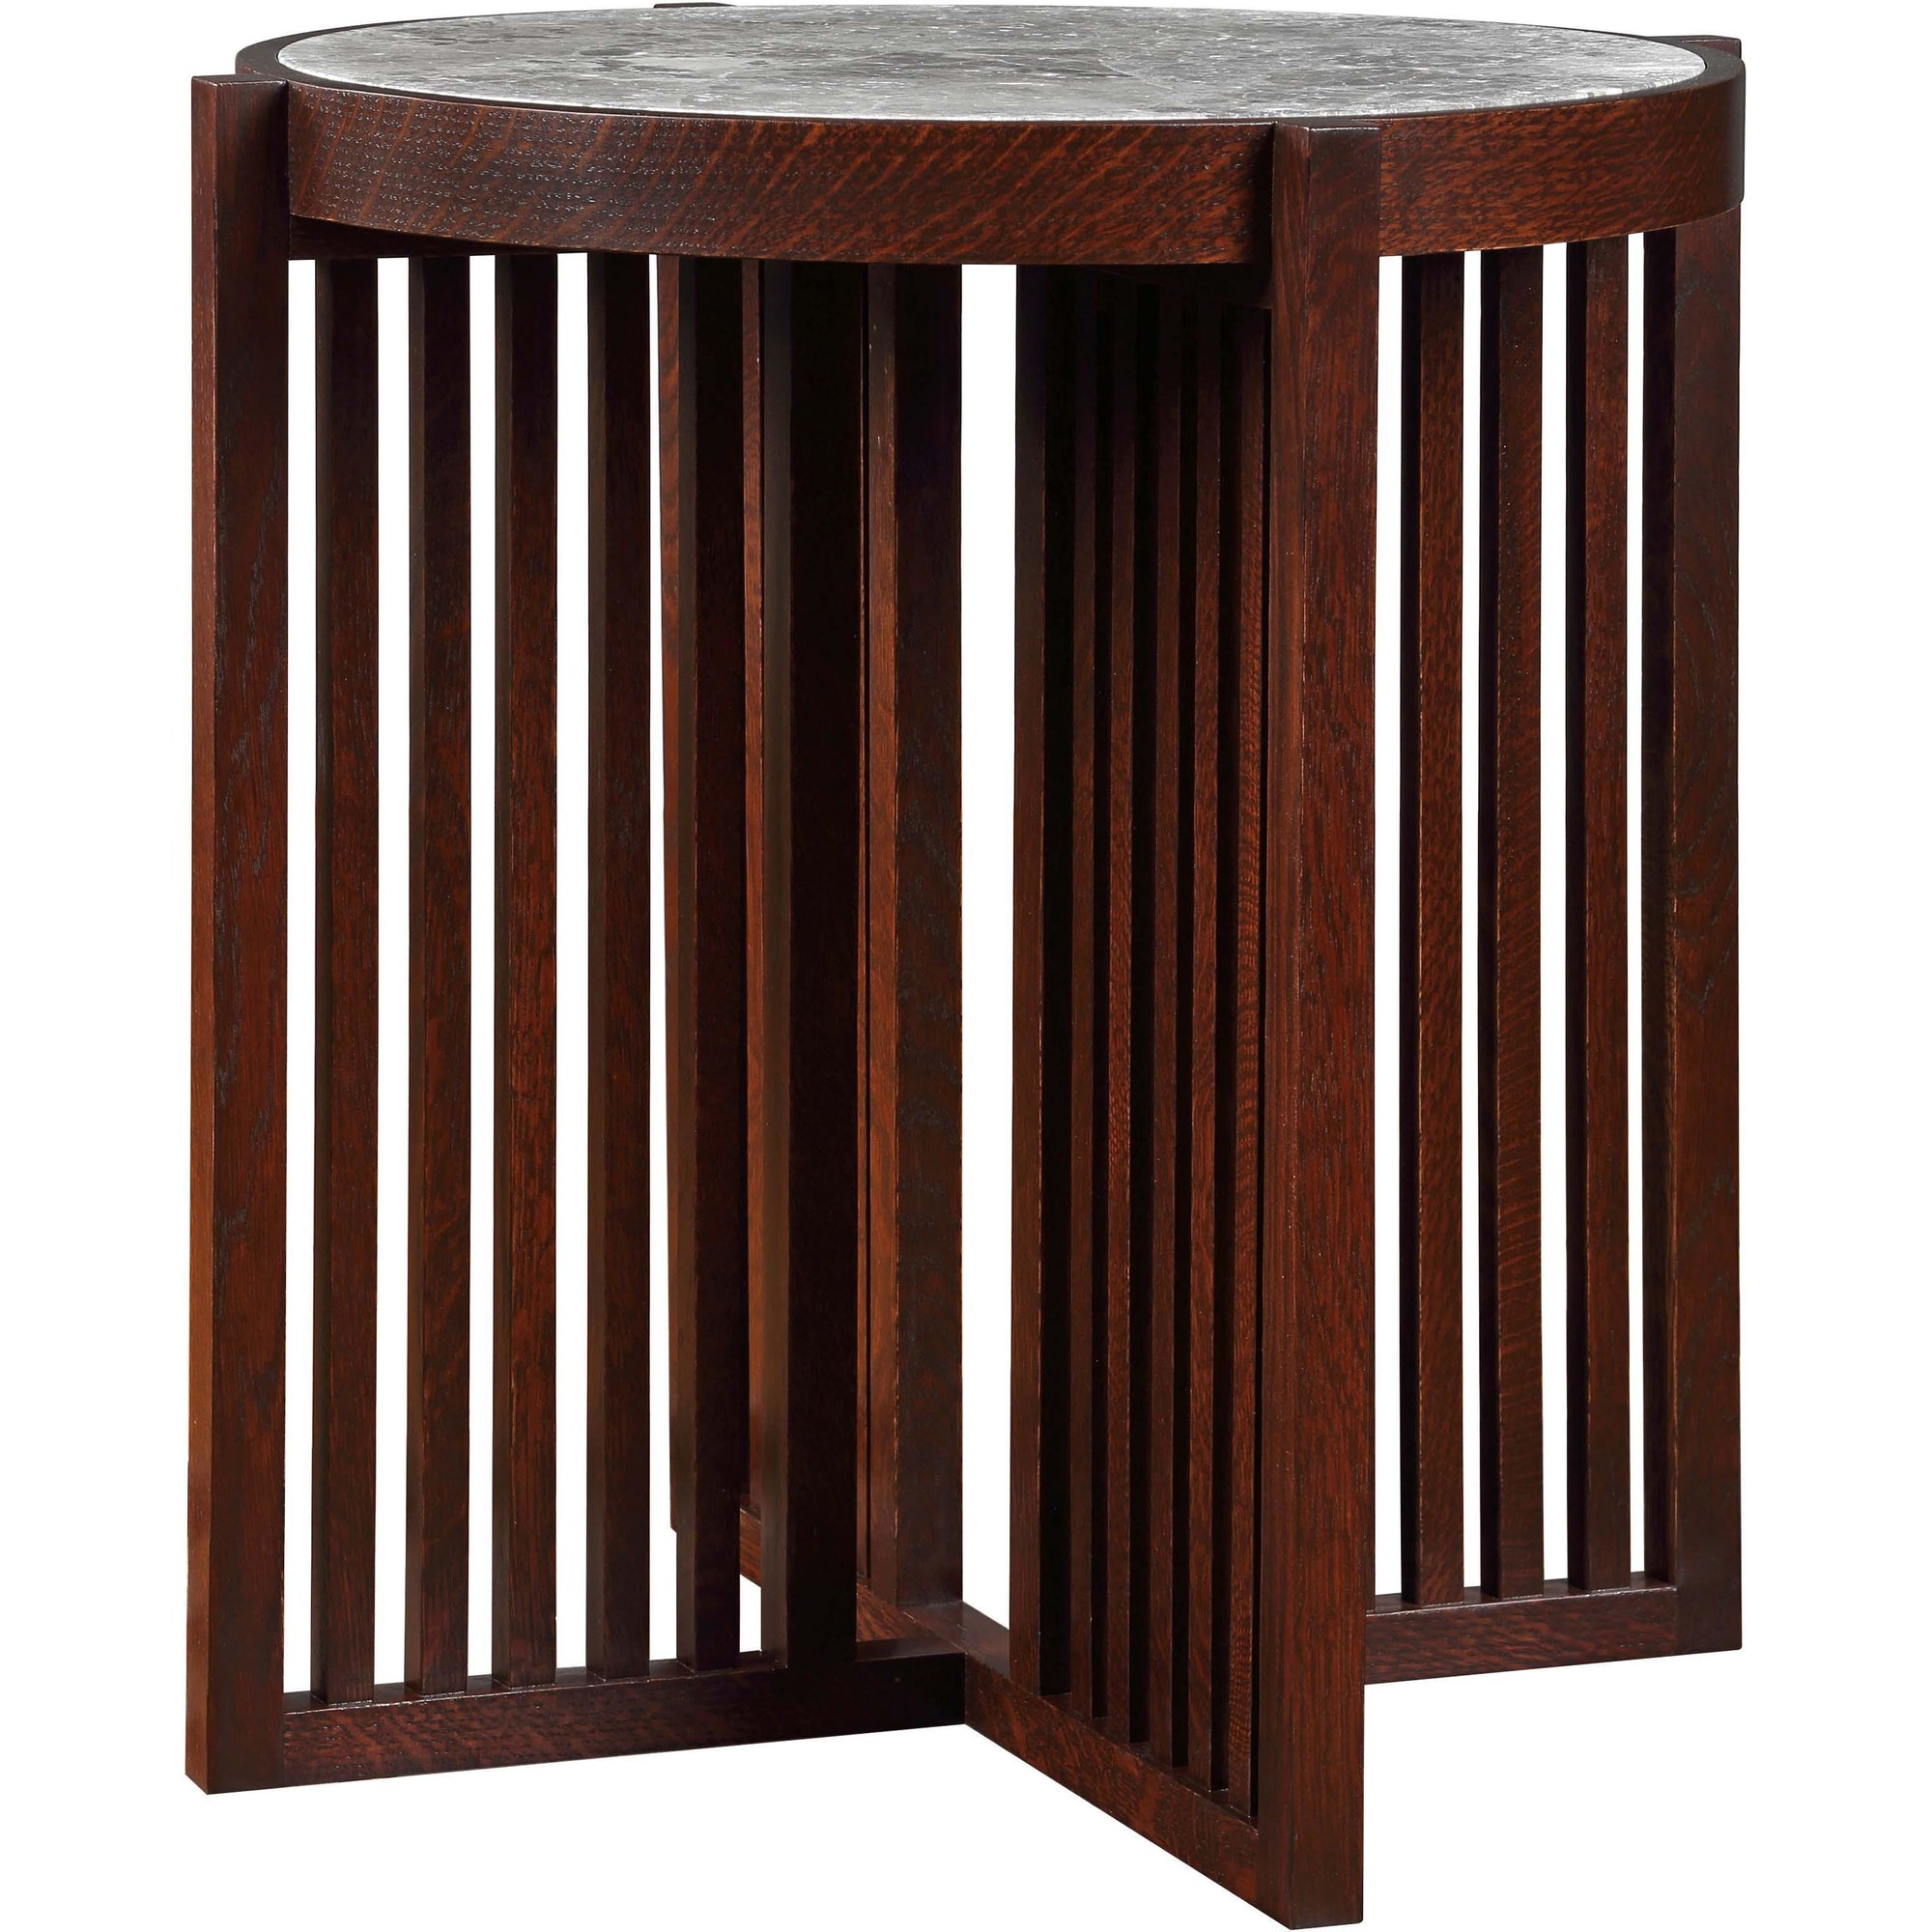 Park Slope Round End Table